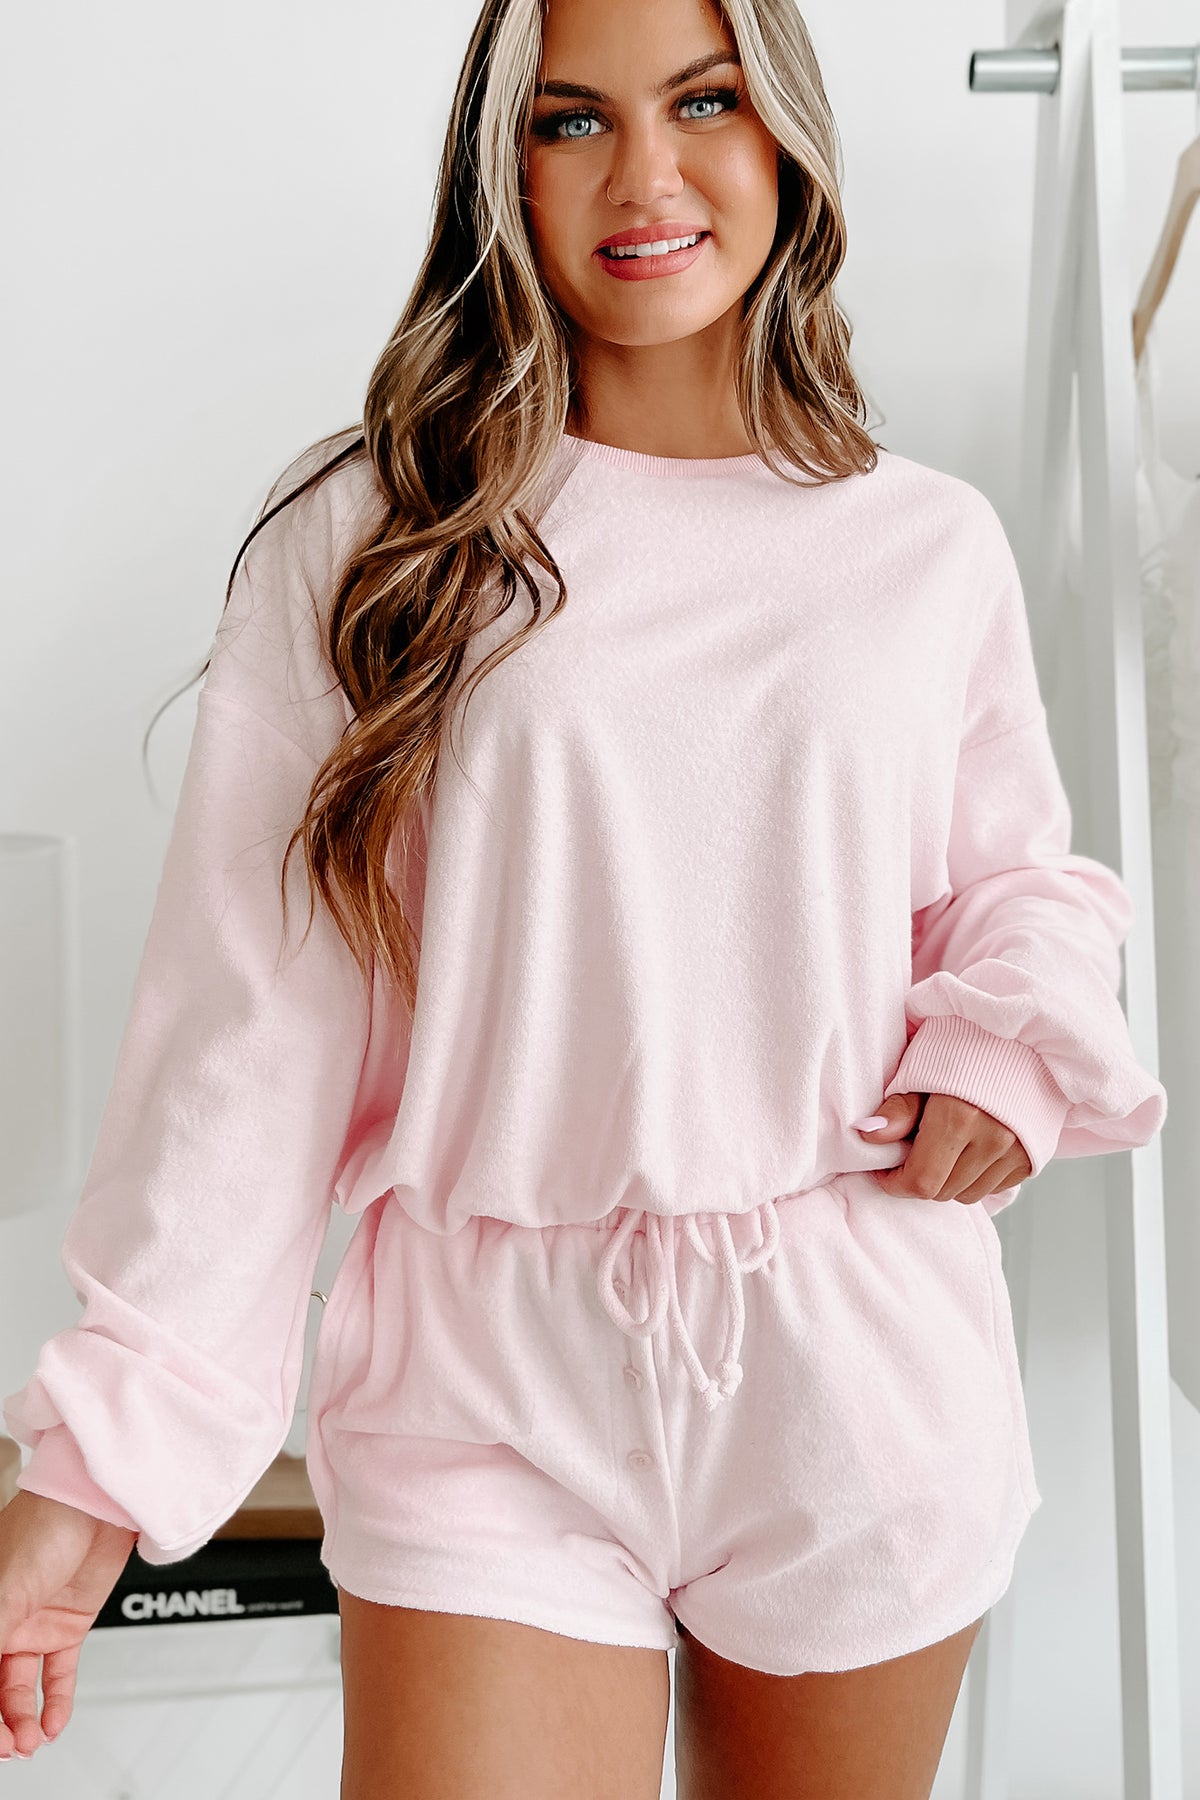 Cozy State Terry Knit Get Look & Pink) Sweatshirt Set cost for Generis the (Light Sweet lower Shorts